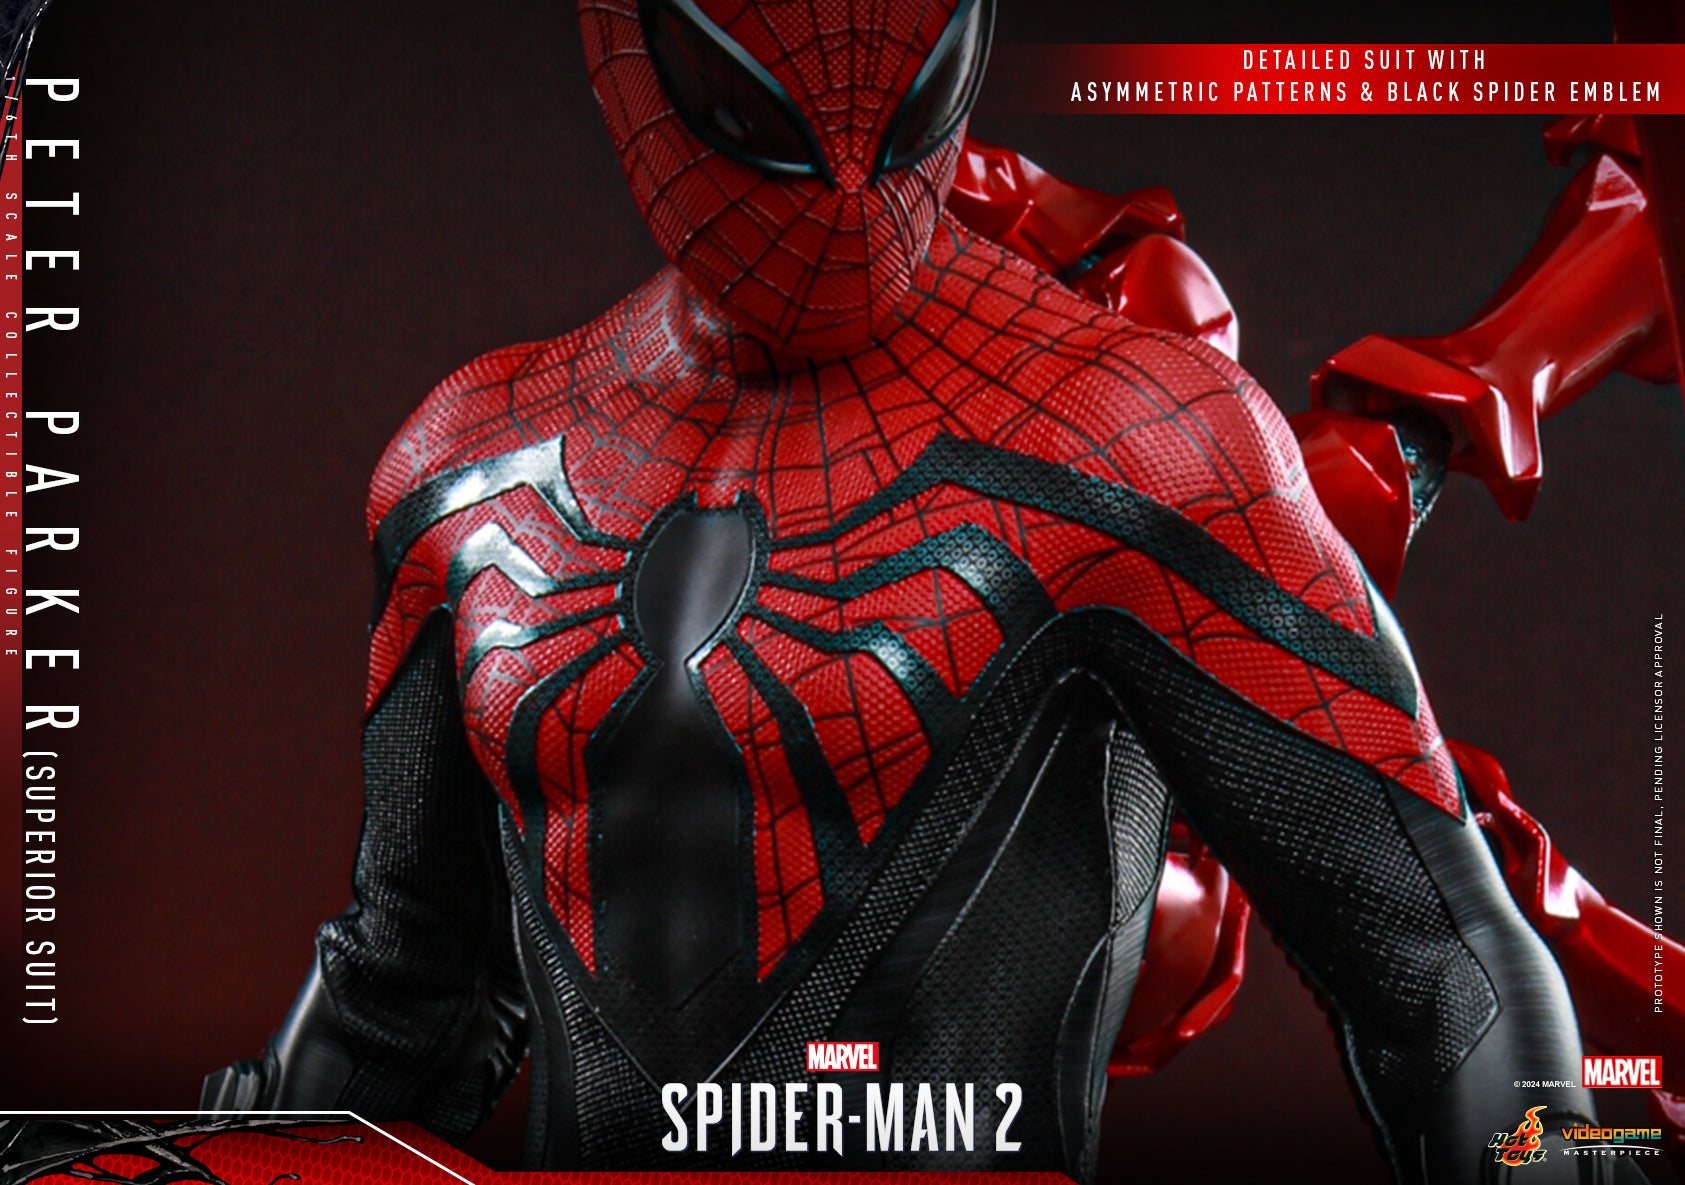 Peter Parker (Superior Suit) Sixth Scale Collectible Figure